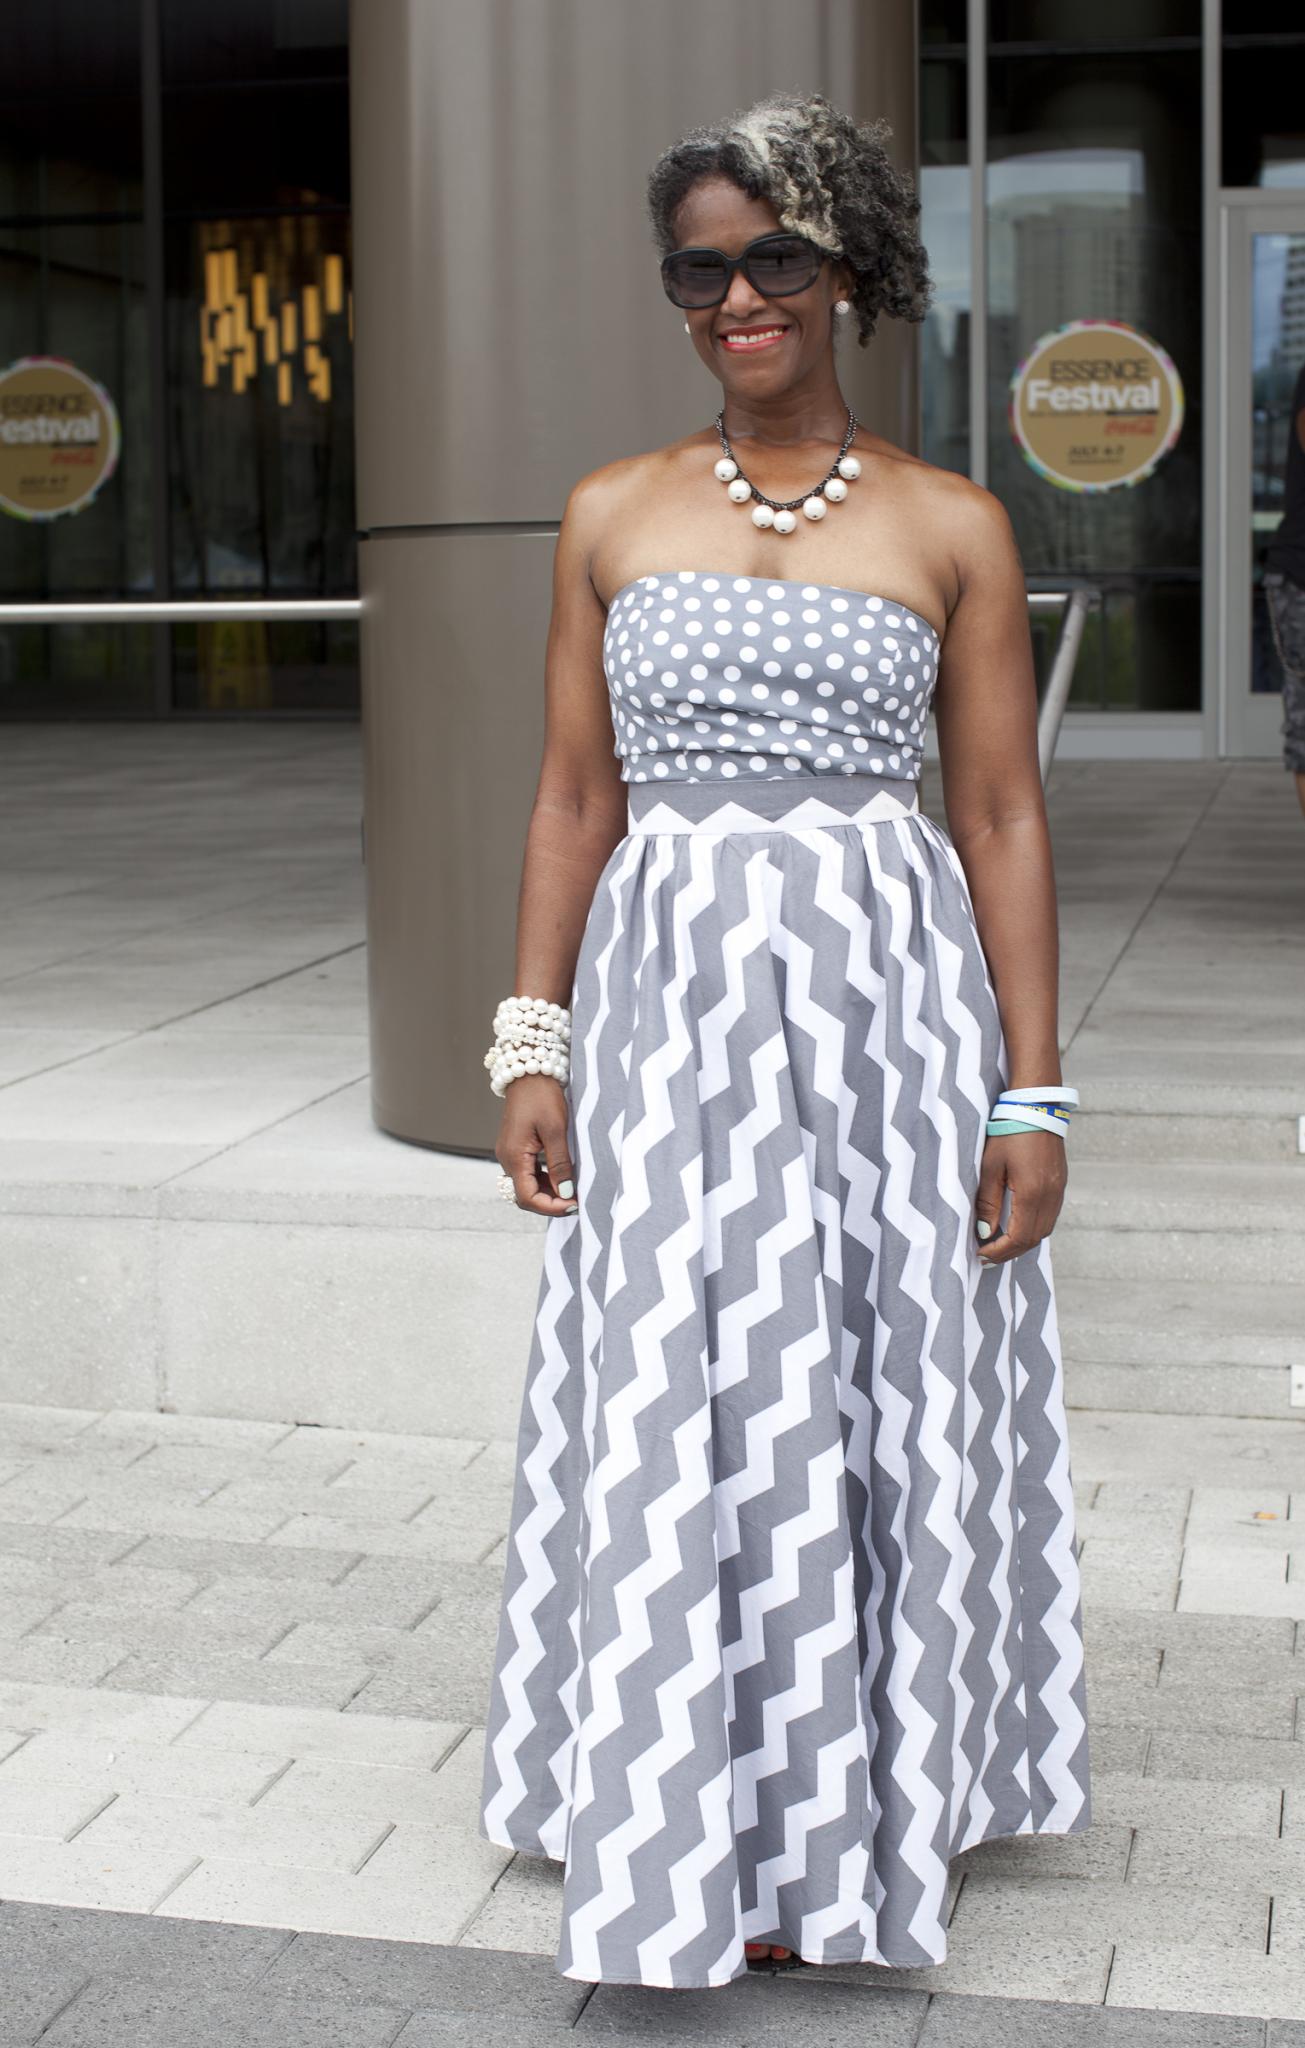 Street Style: Convention Center Chic